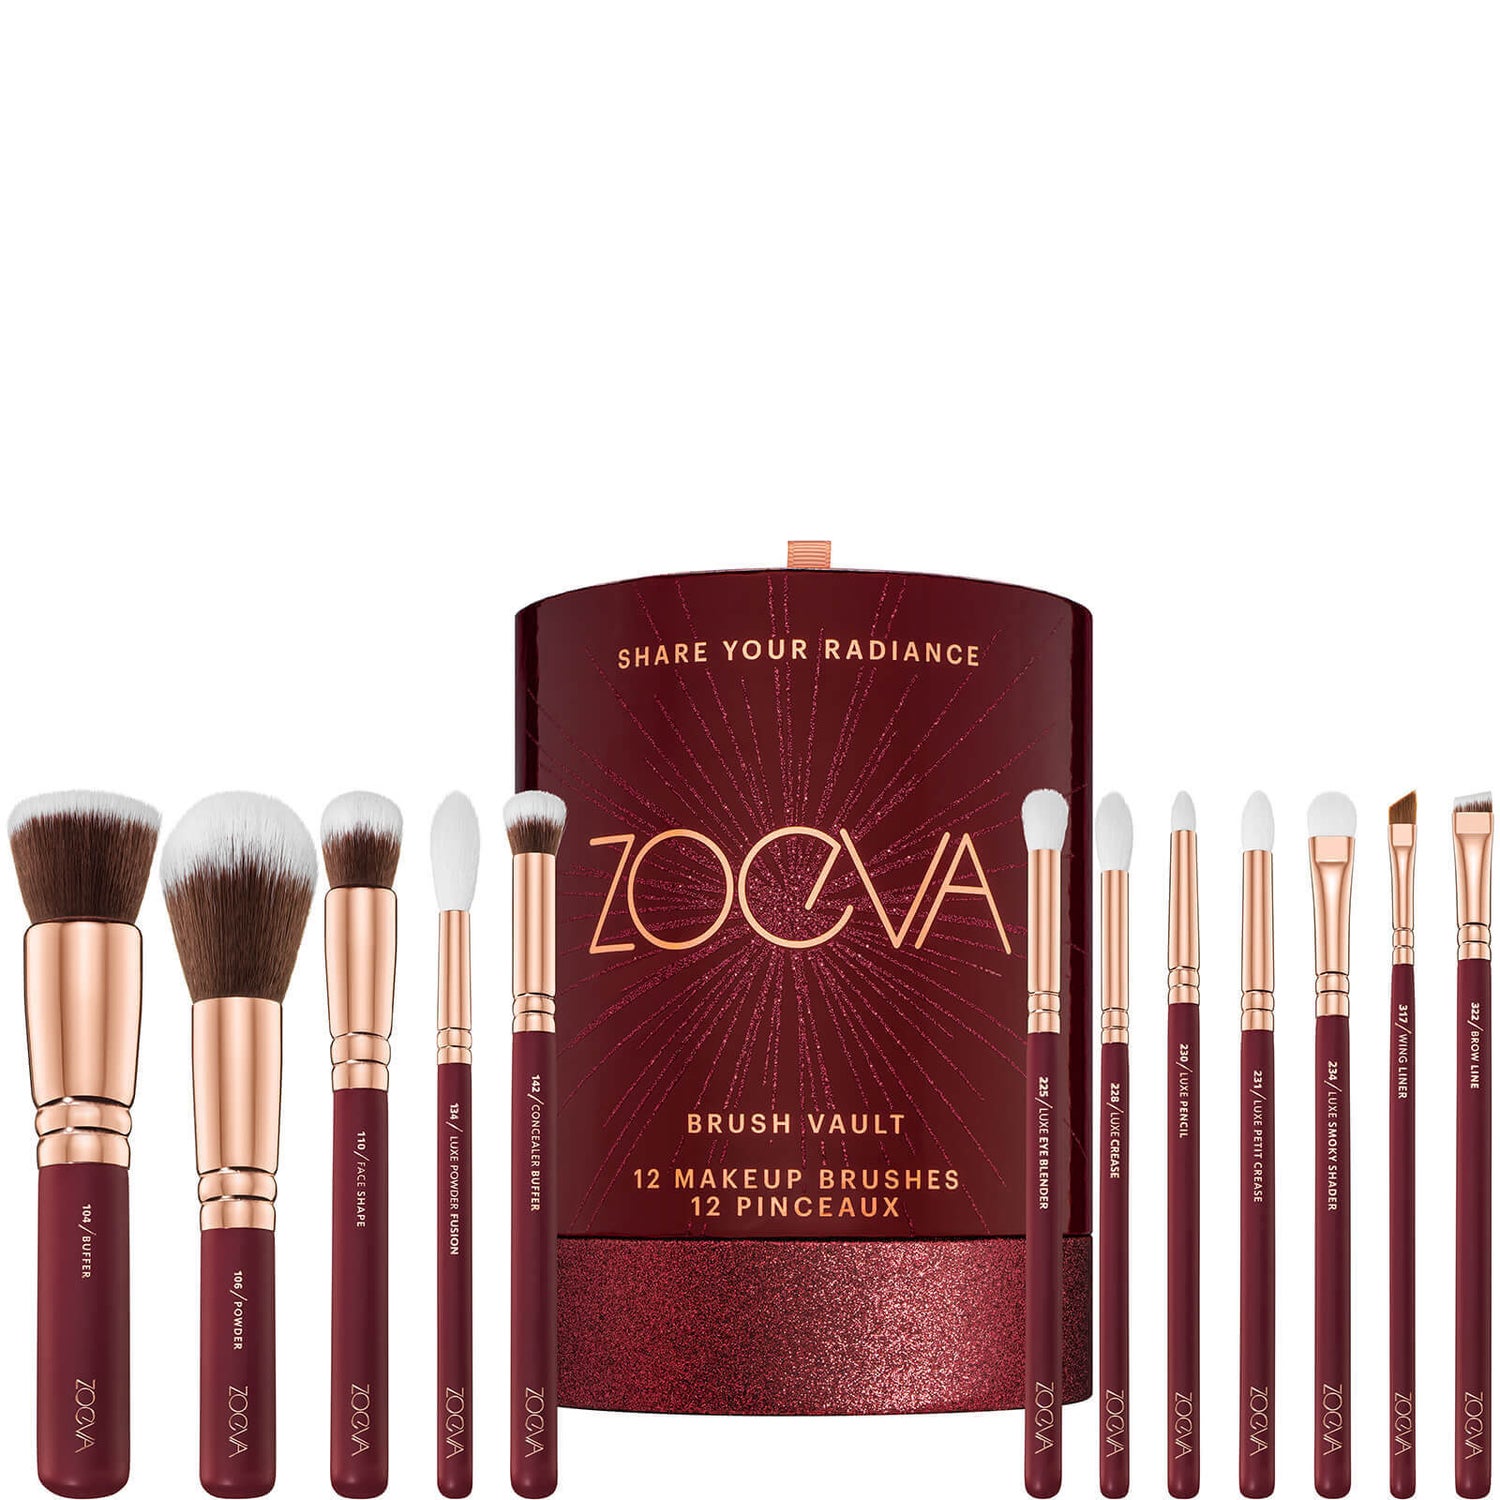 ZOEVA Share Your Radiance Cocotte Brush Vault